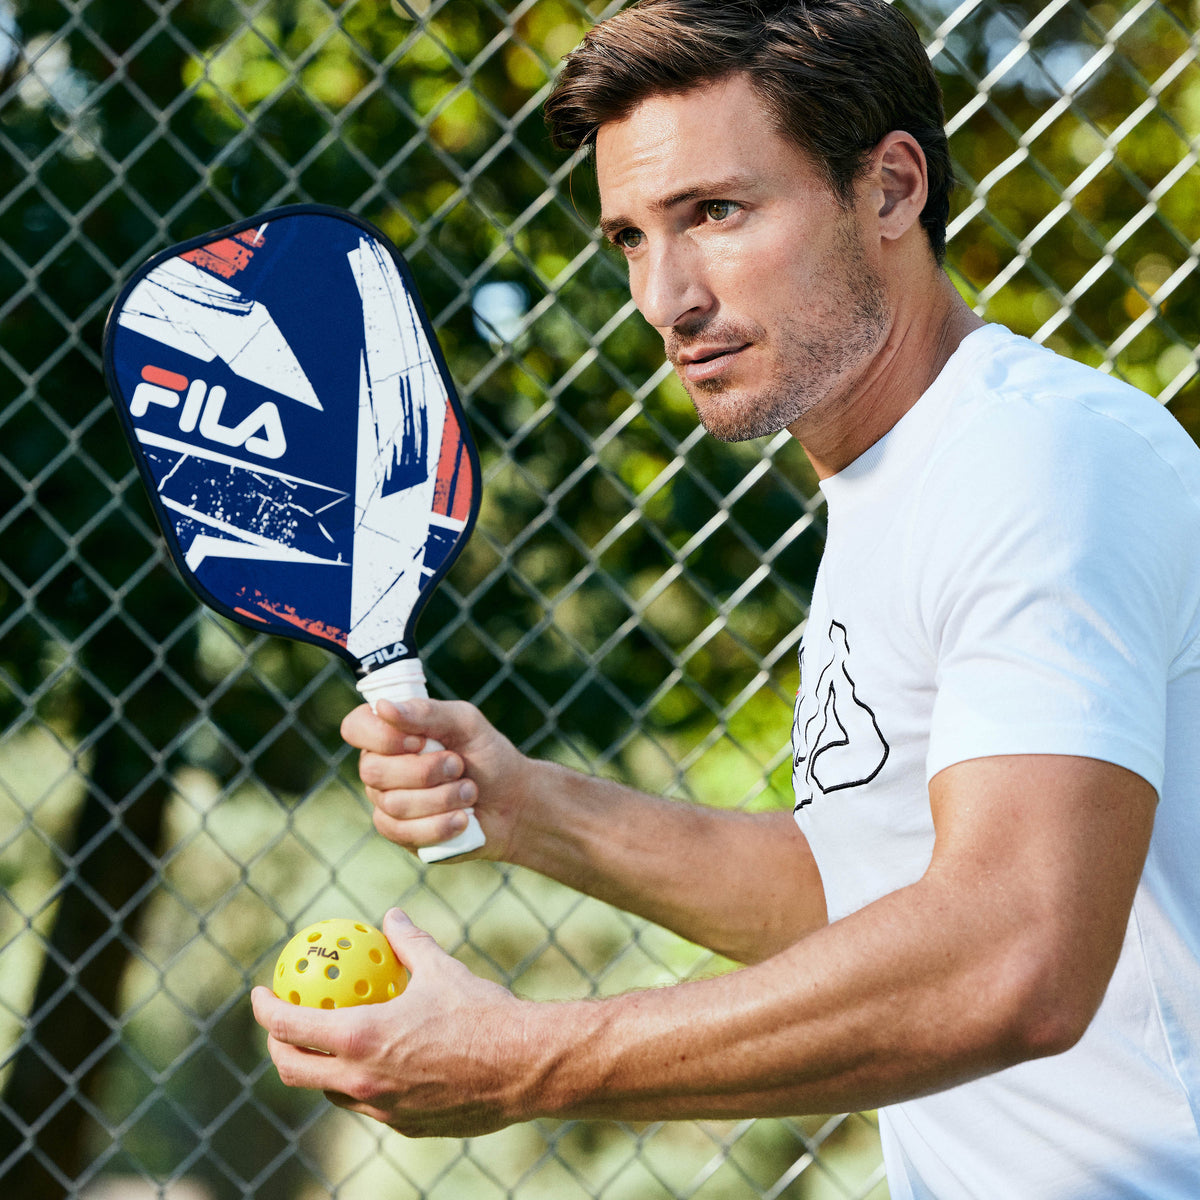 Person holding the FILA Fiberglass Paddle -Action getting ready to hit the ball